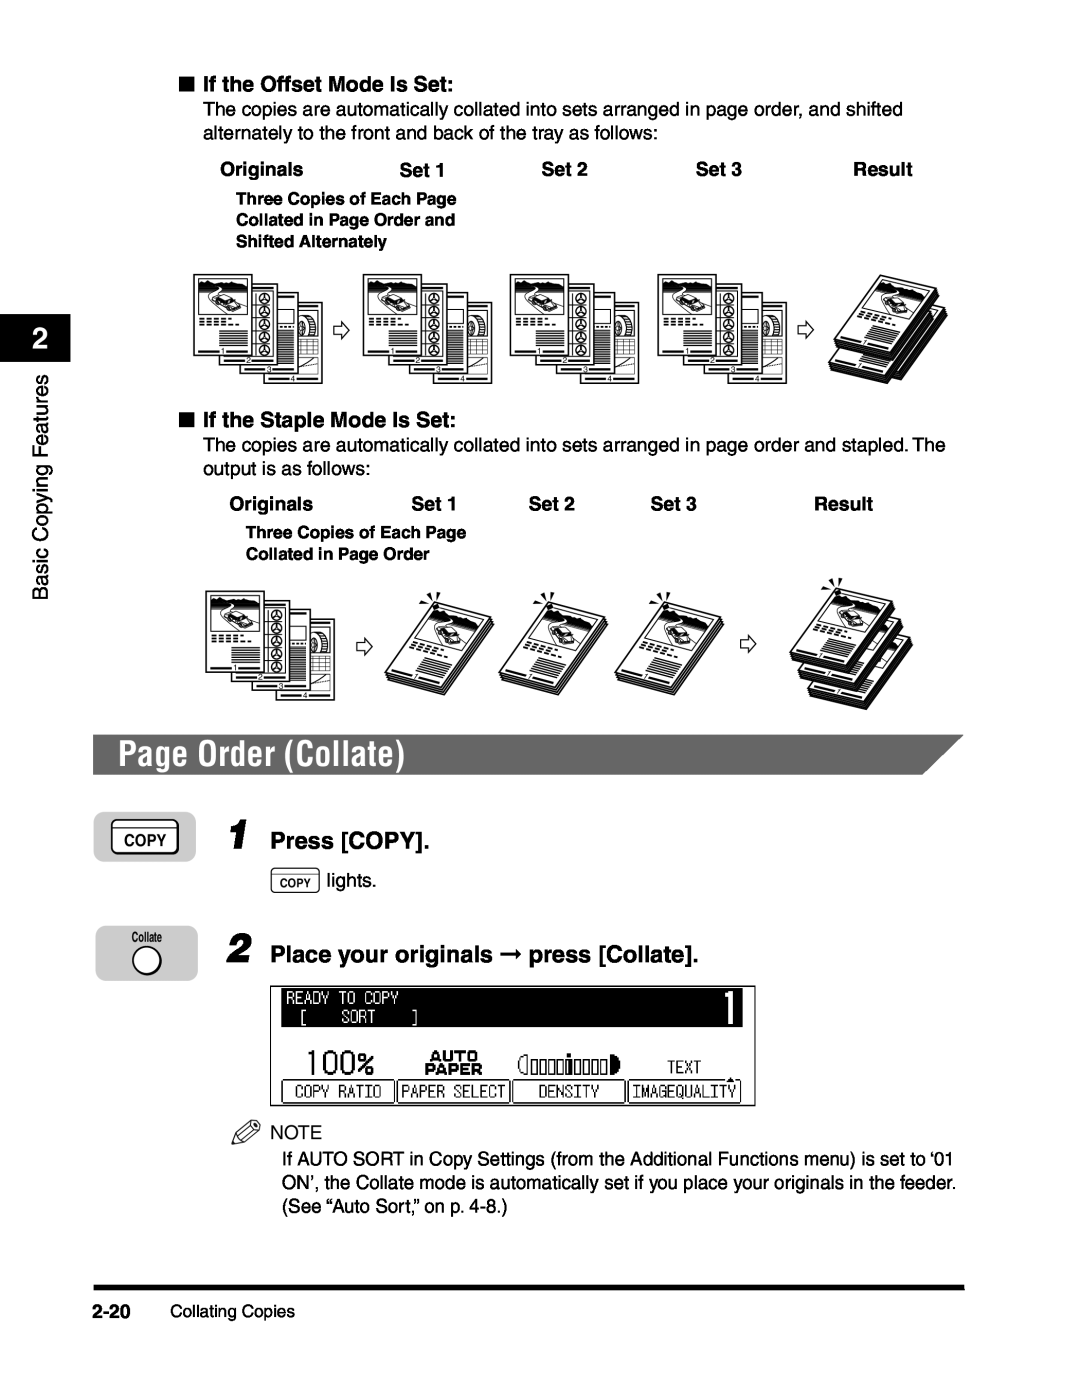 Canon 2010F Page Order Collate, If the Offset Mode Is Set, If the Staple Mode Is Set, Place your originals press Collate 